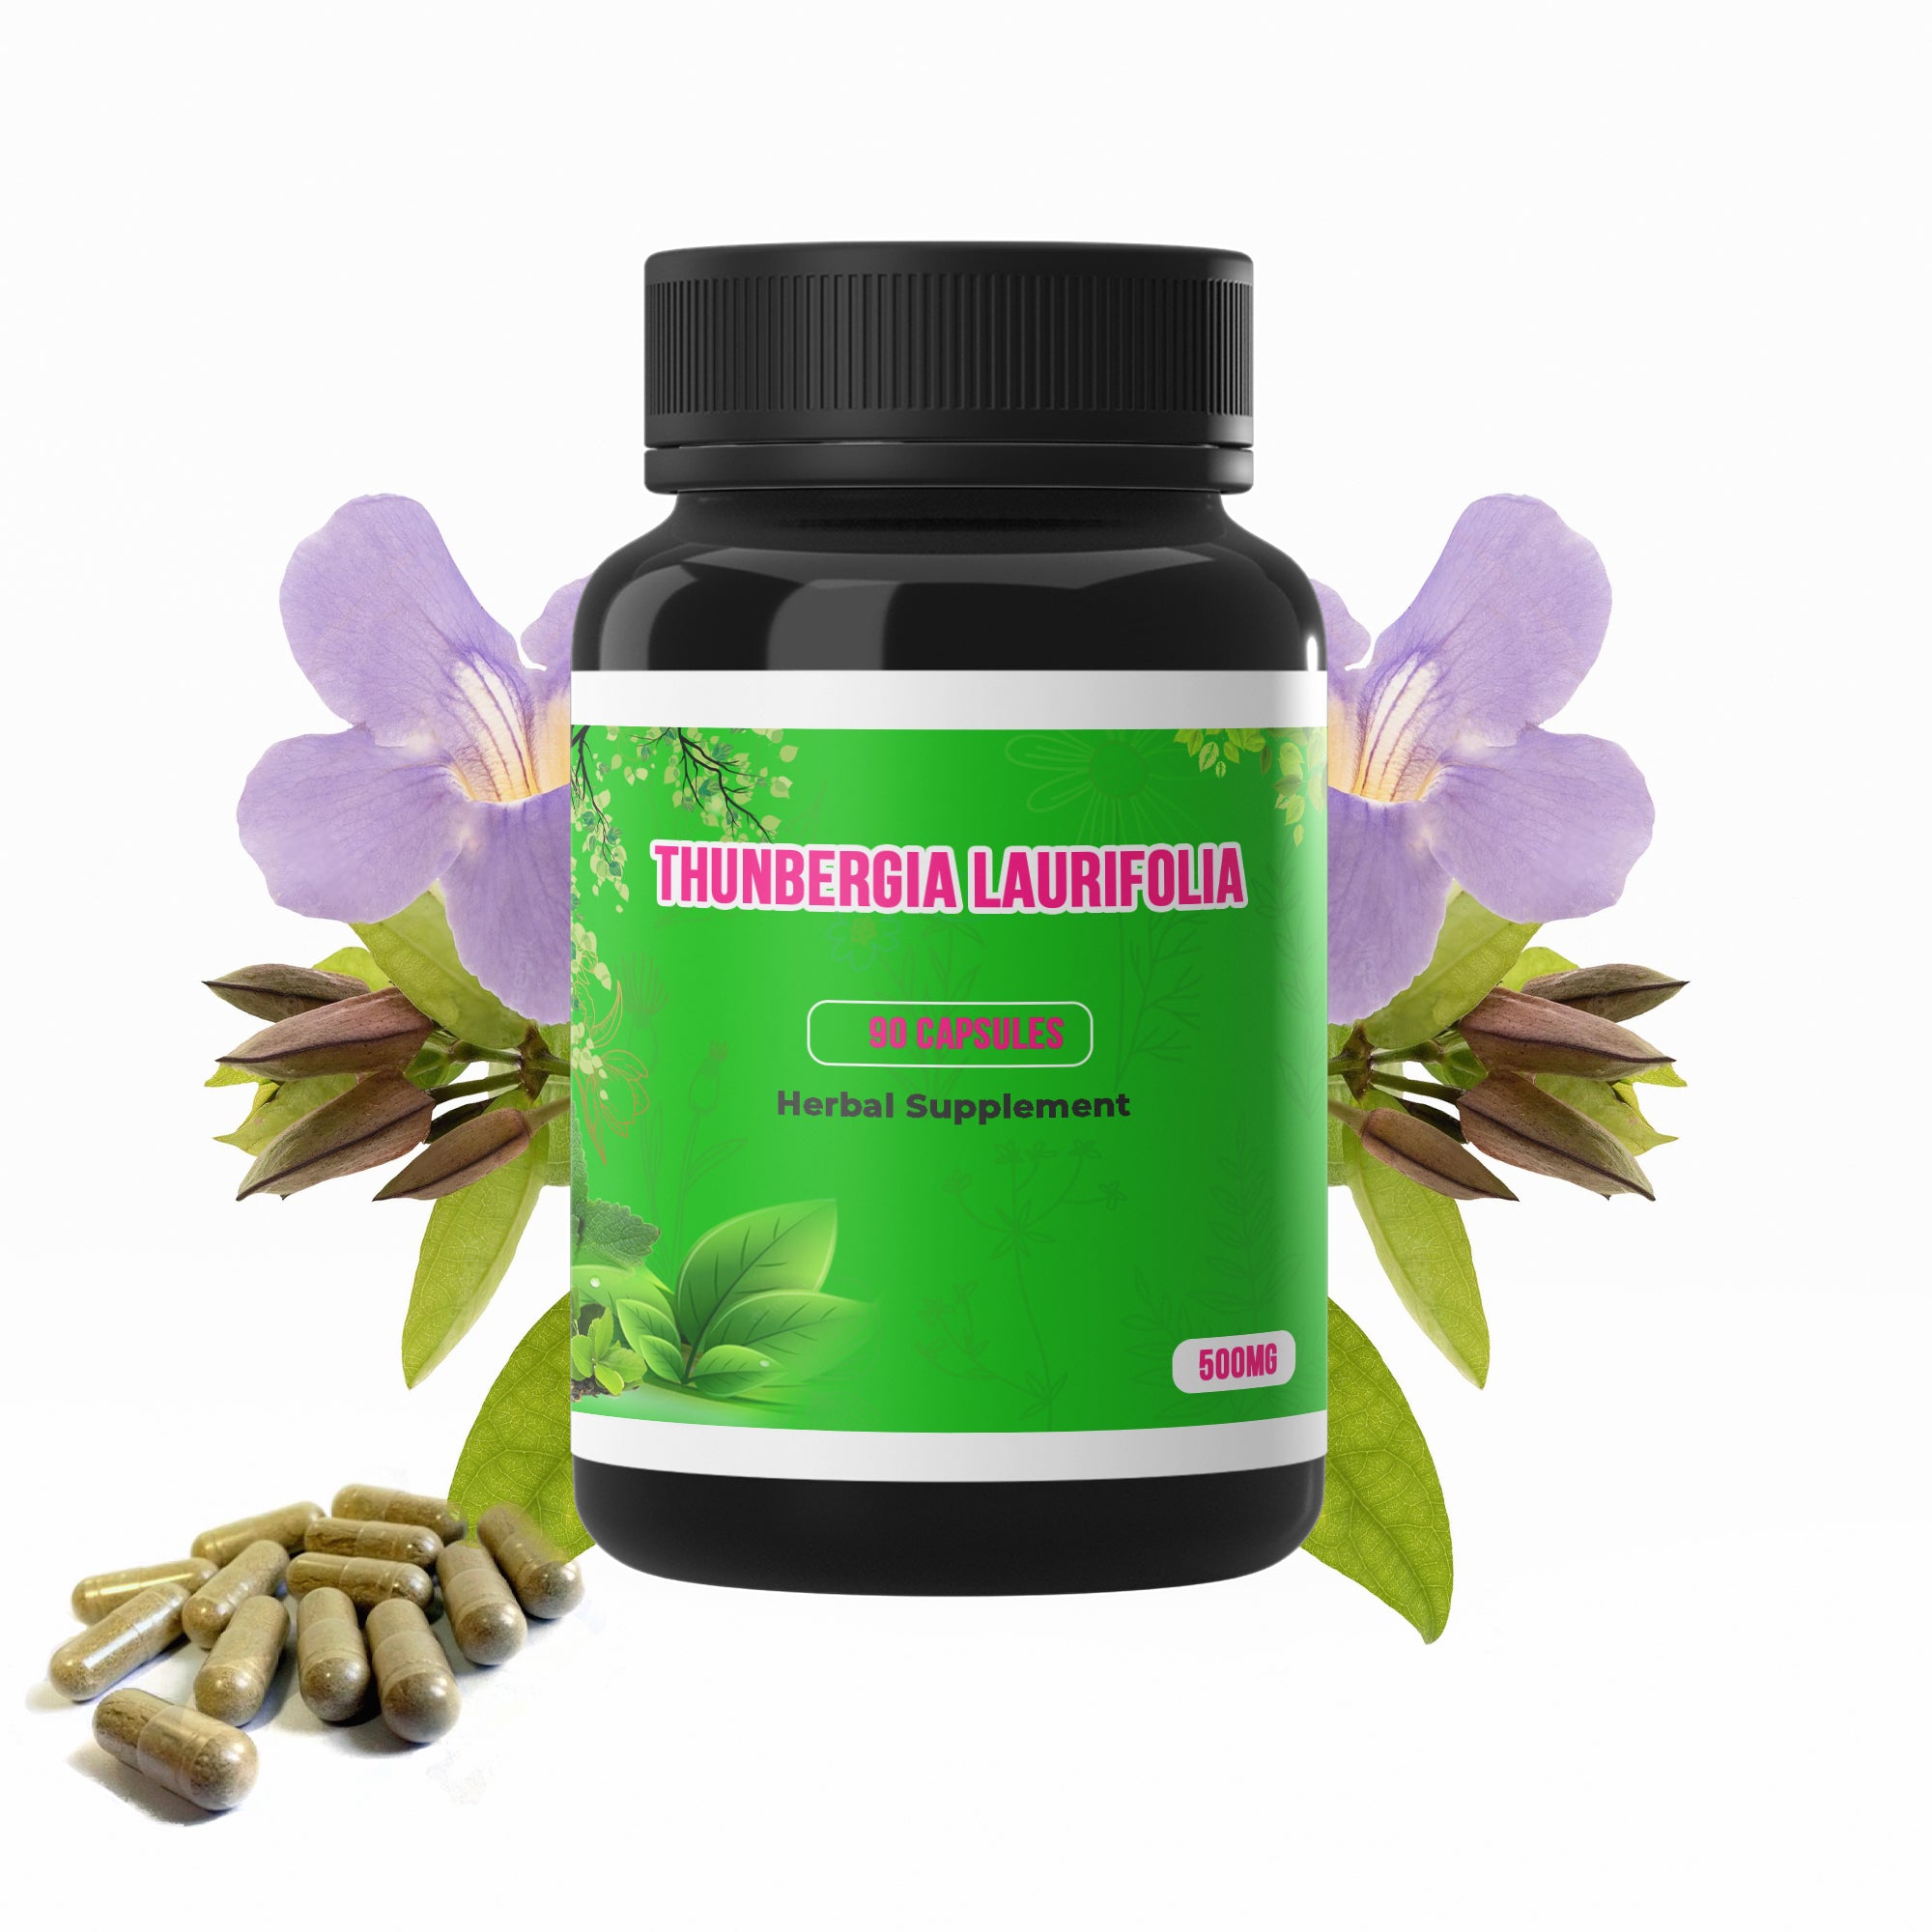 100% Organic Authentic From Thailand Country of Herbal Industry, Thunbergia Laurifolia